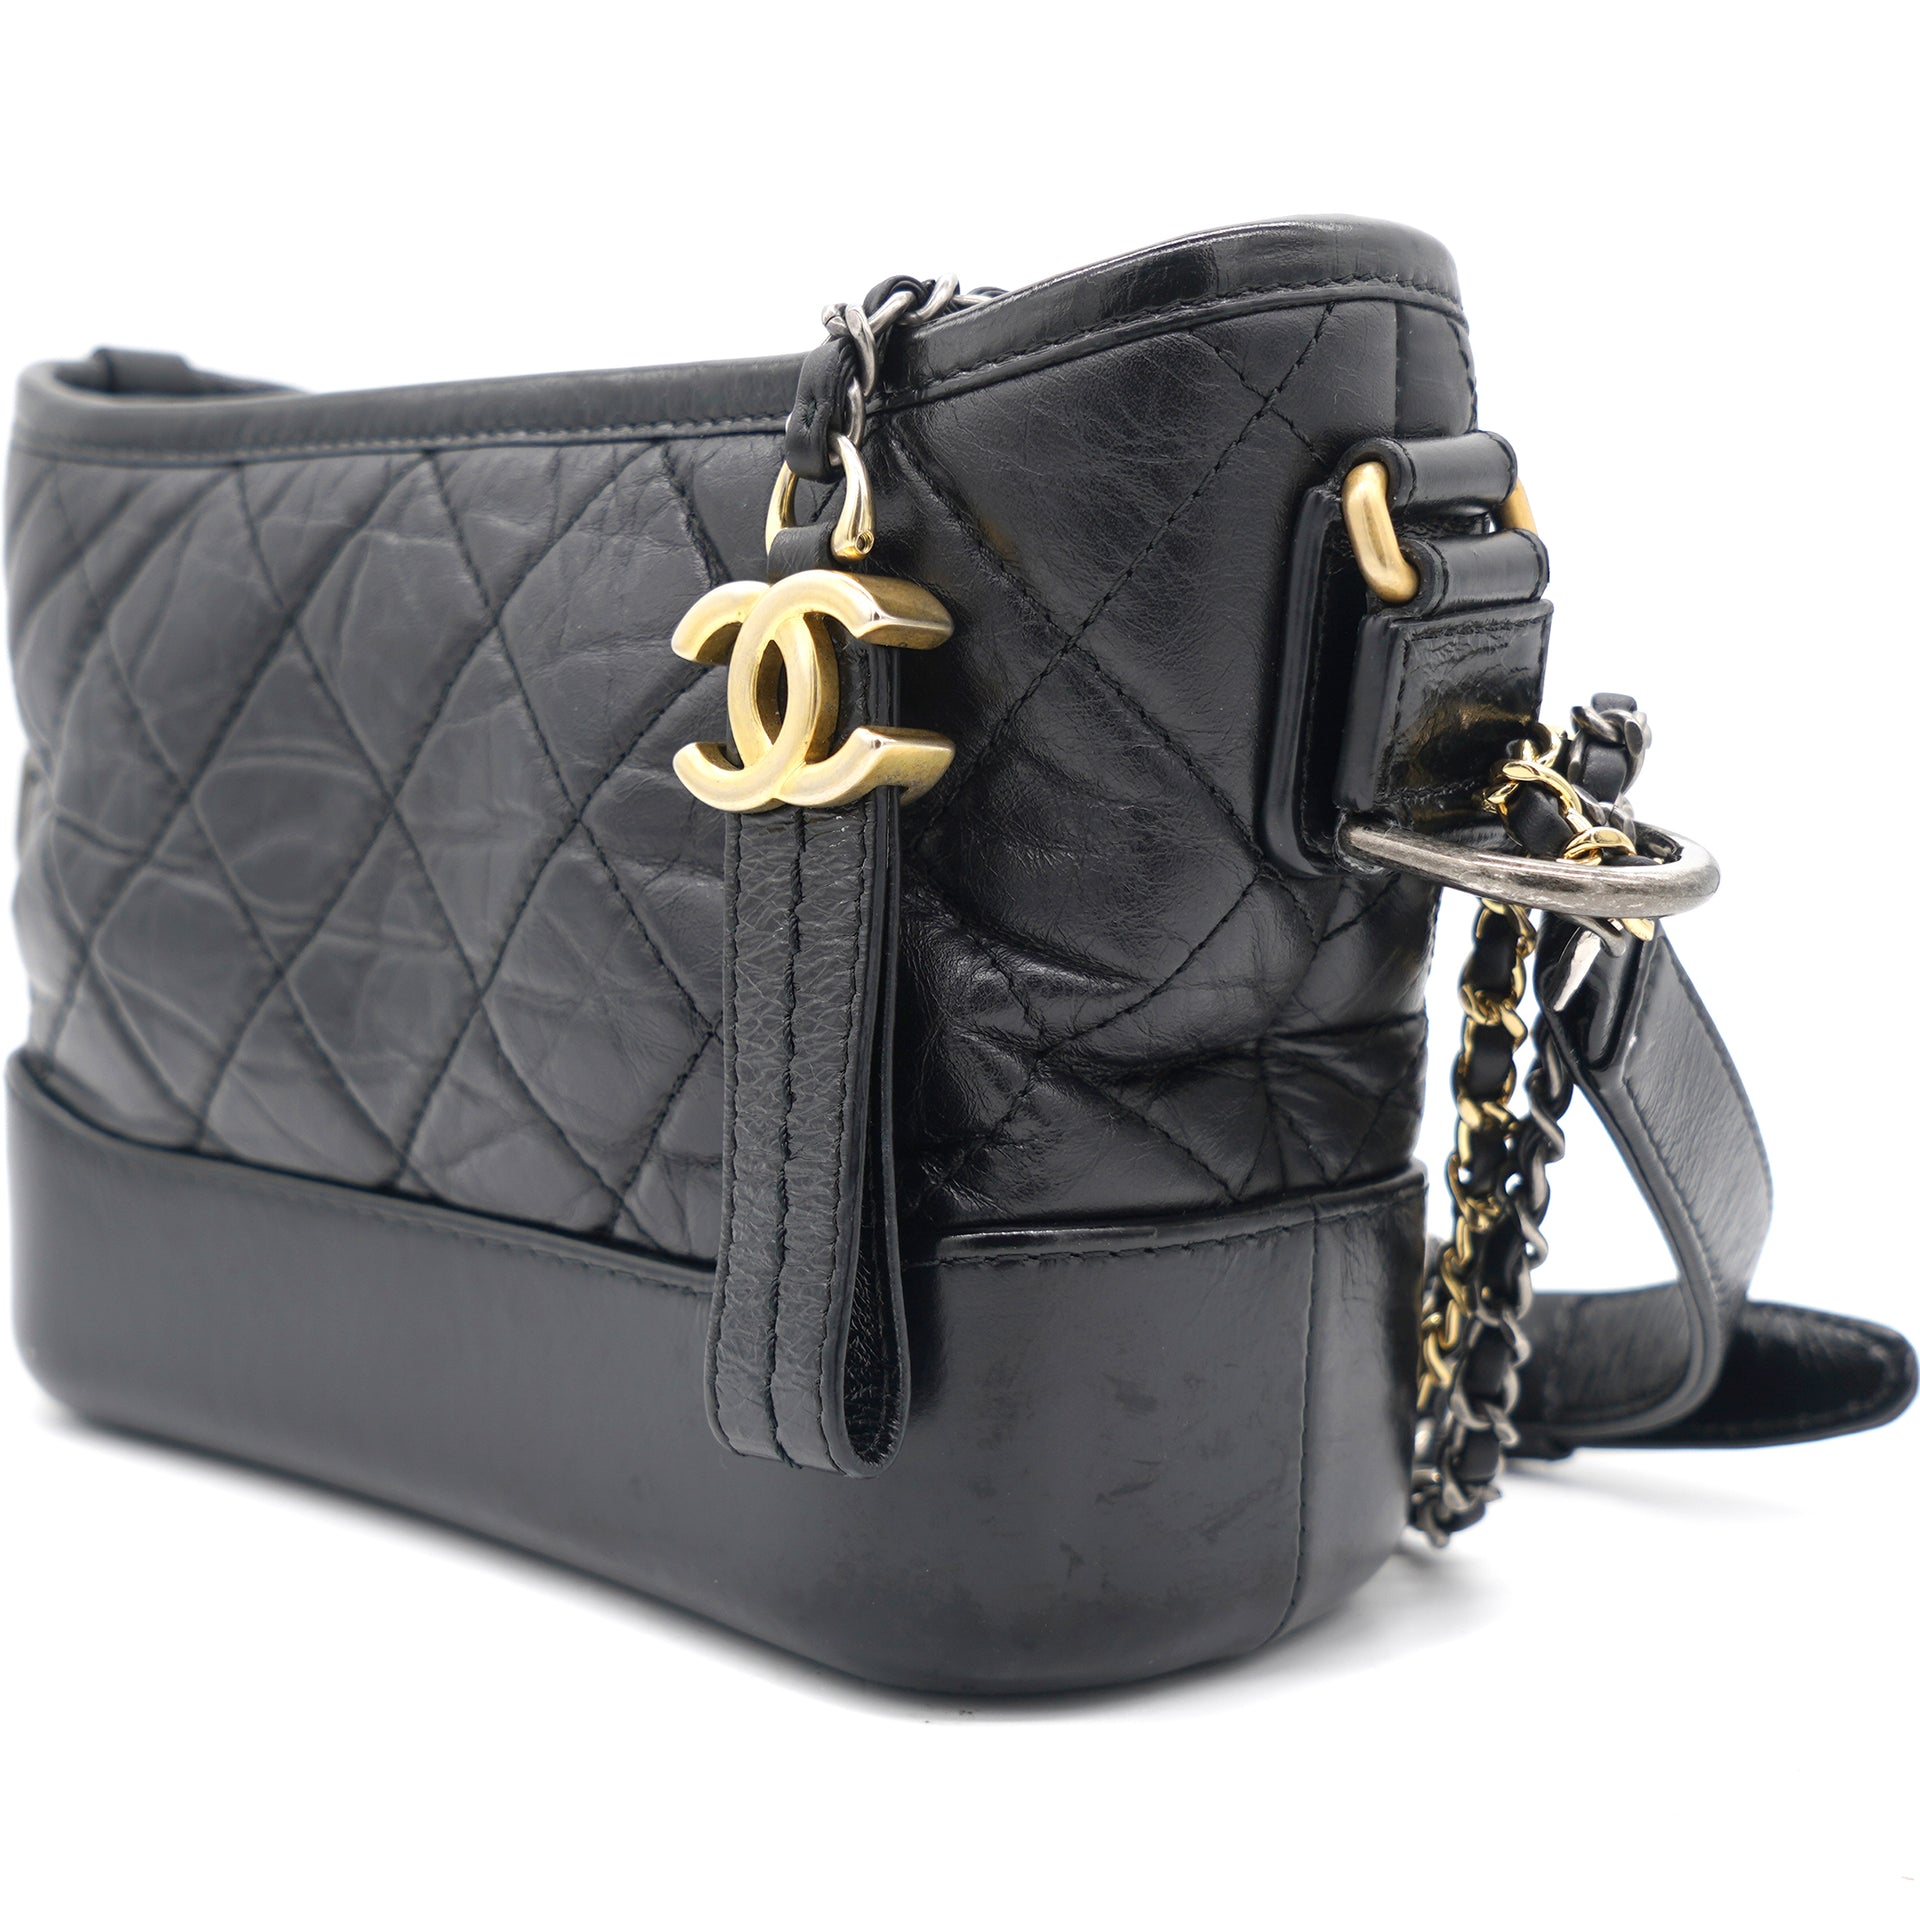 CHANEL Aged Calfskin Quilted Small Gabrielle Hobo Black 176344